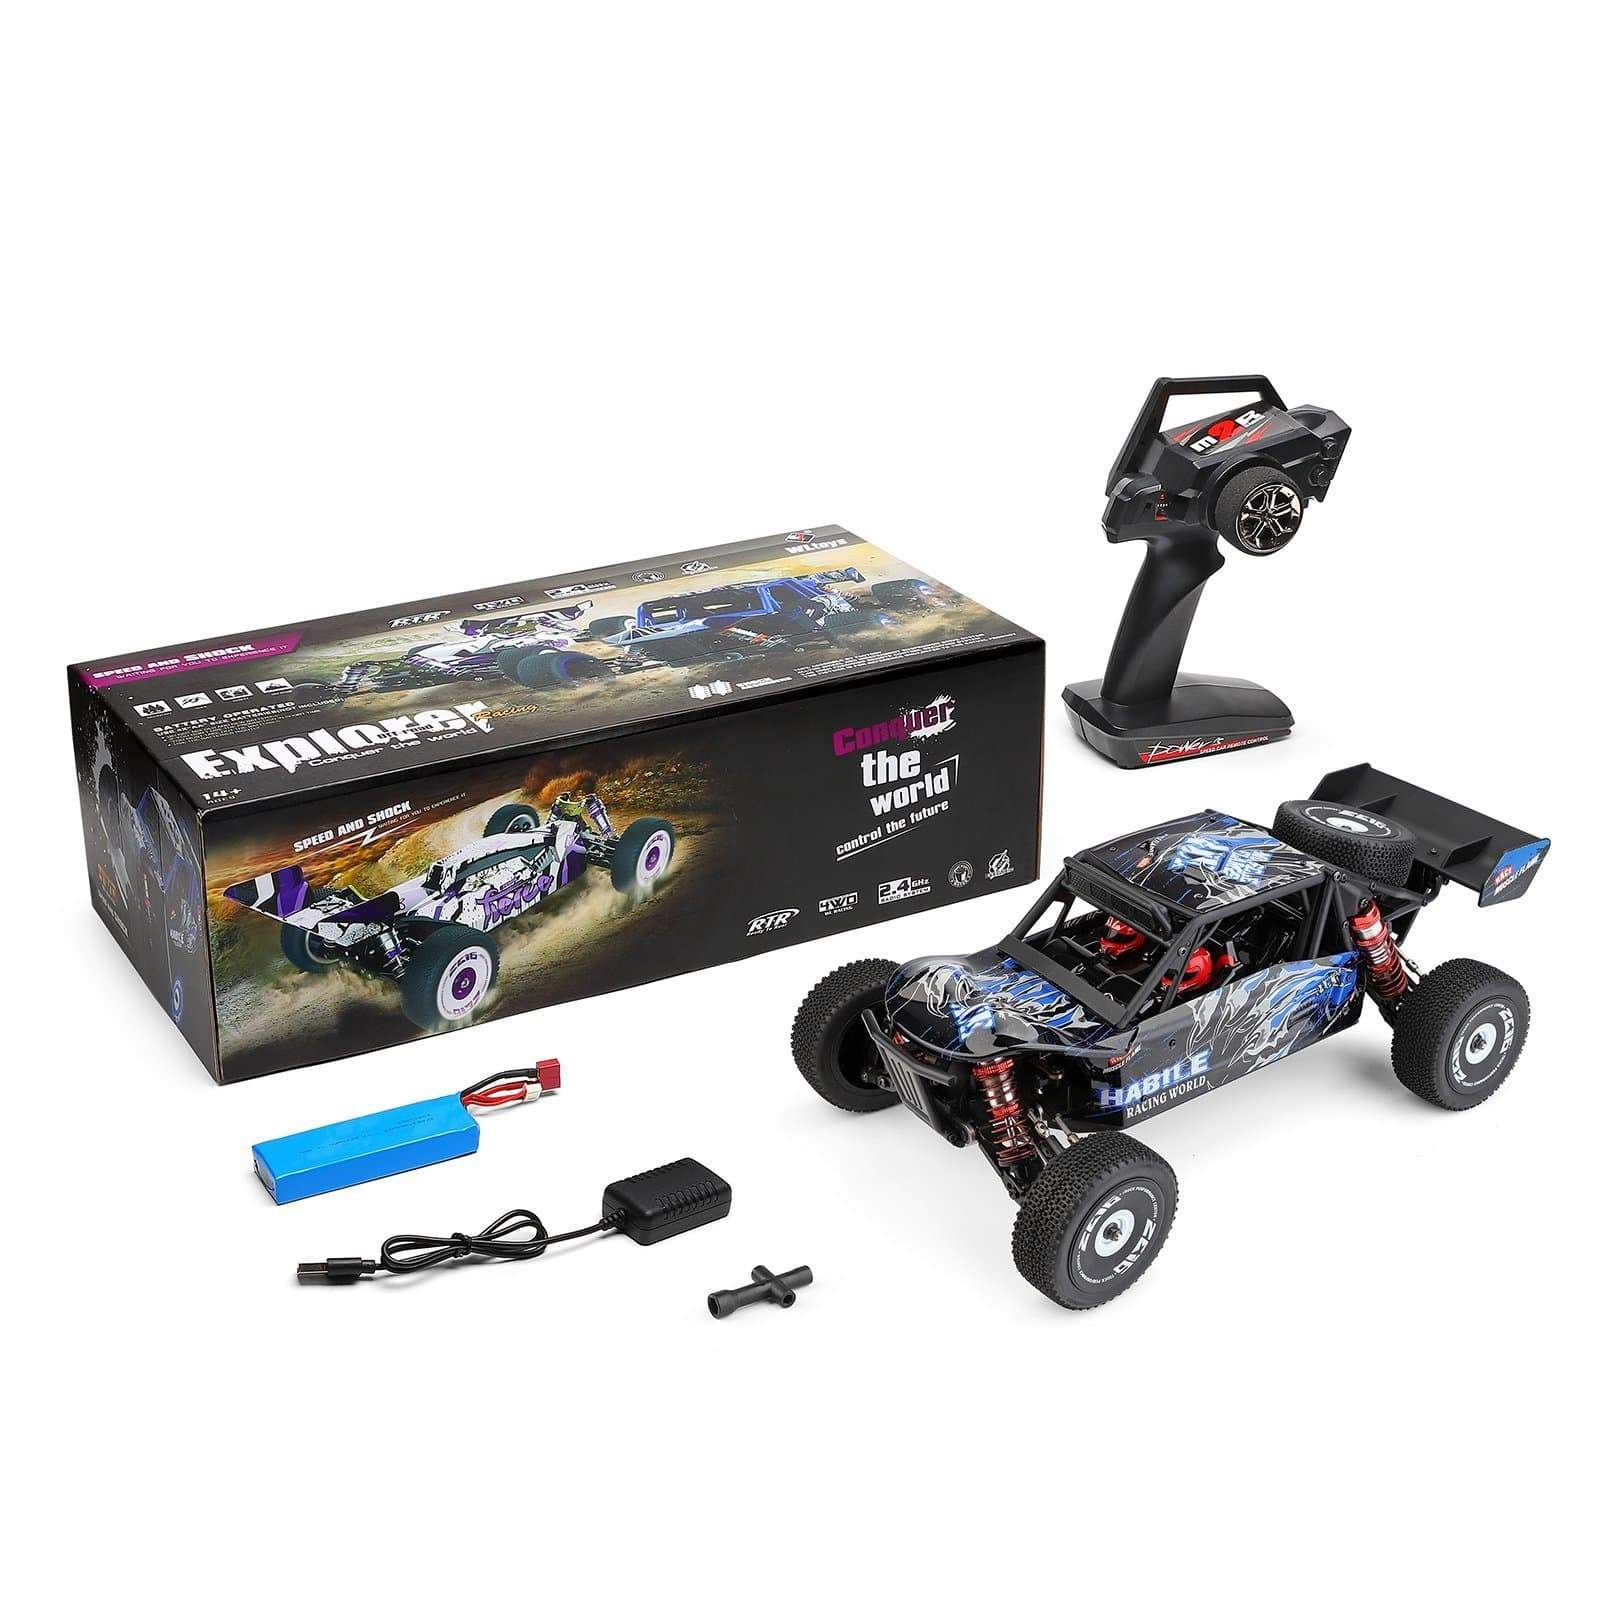 What is the best budget RC car?